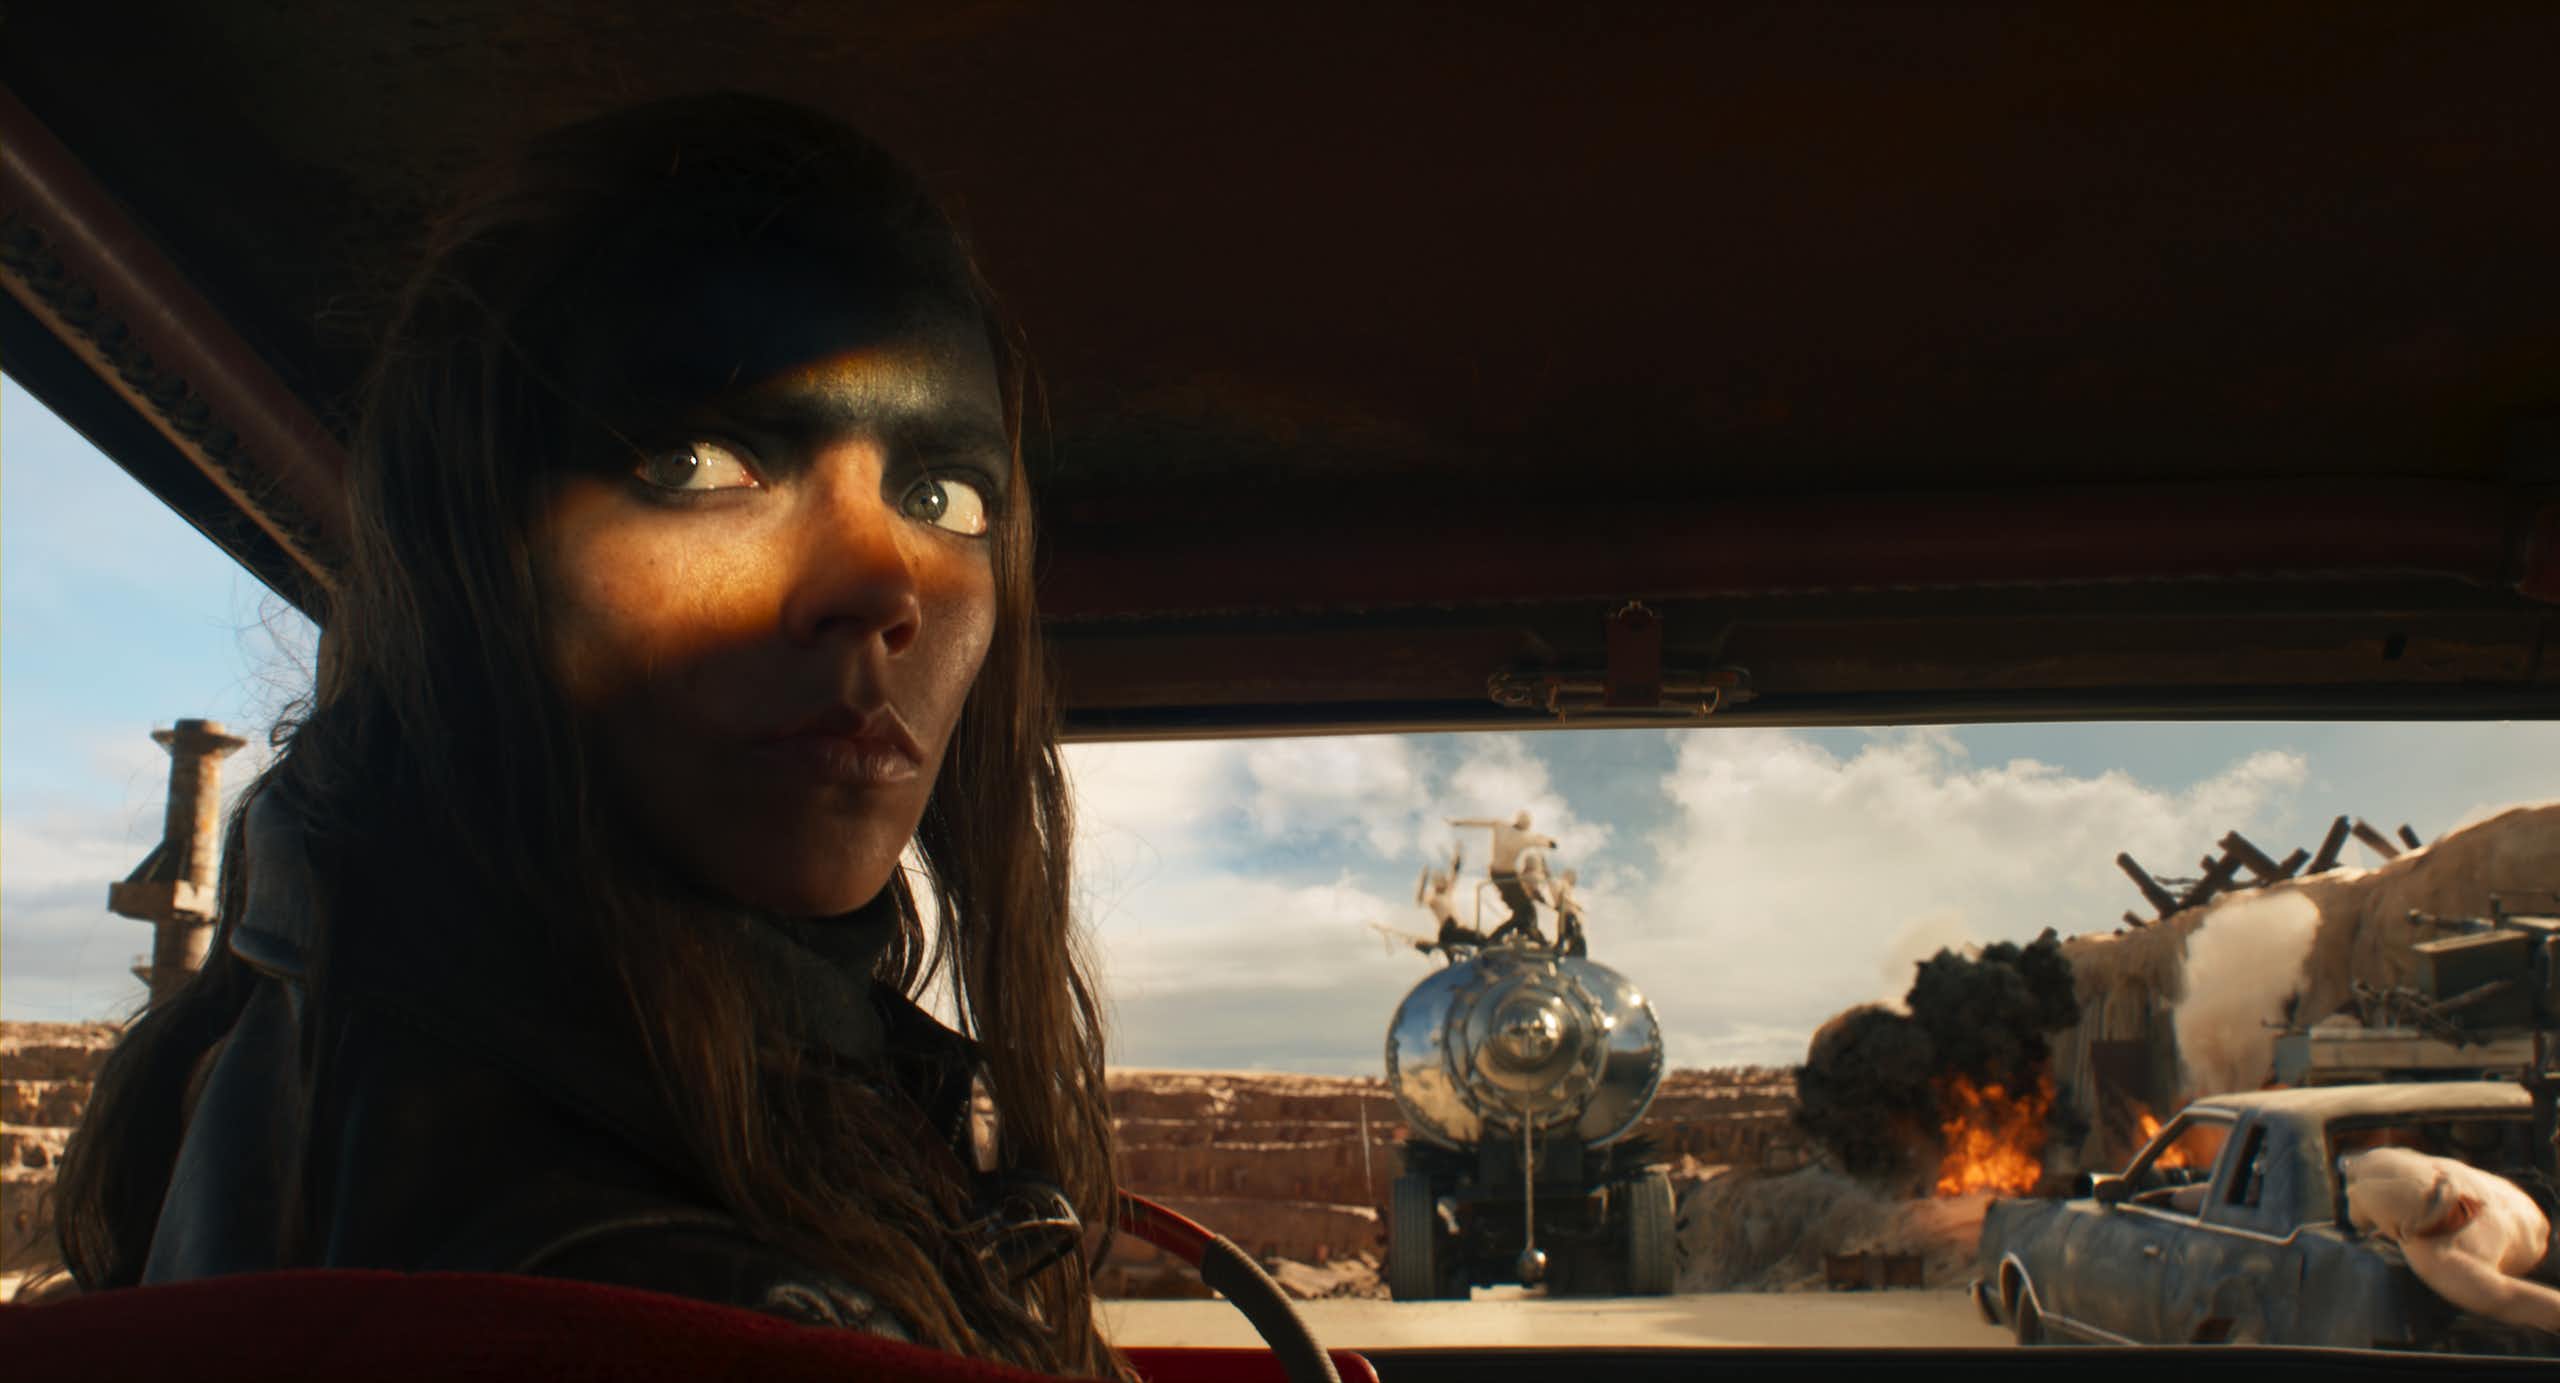 A still from the movie featuring lead actress in a truck cab.